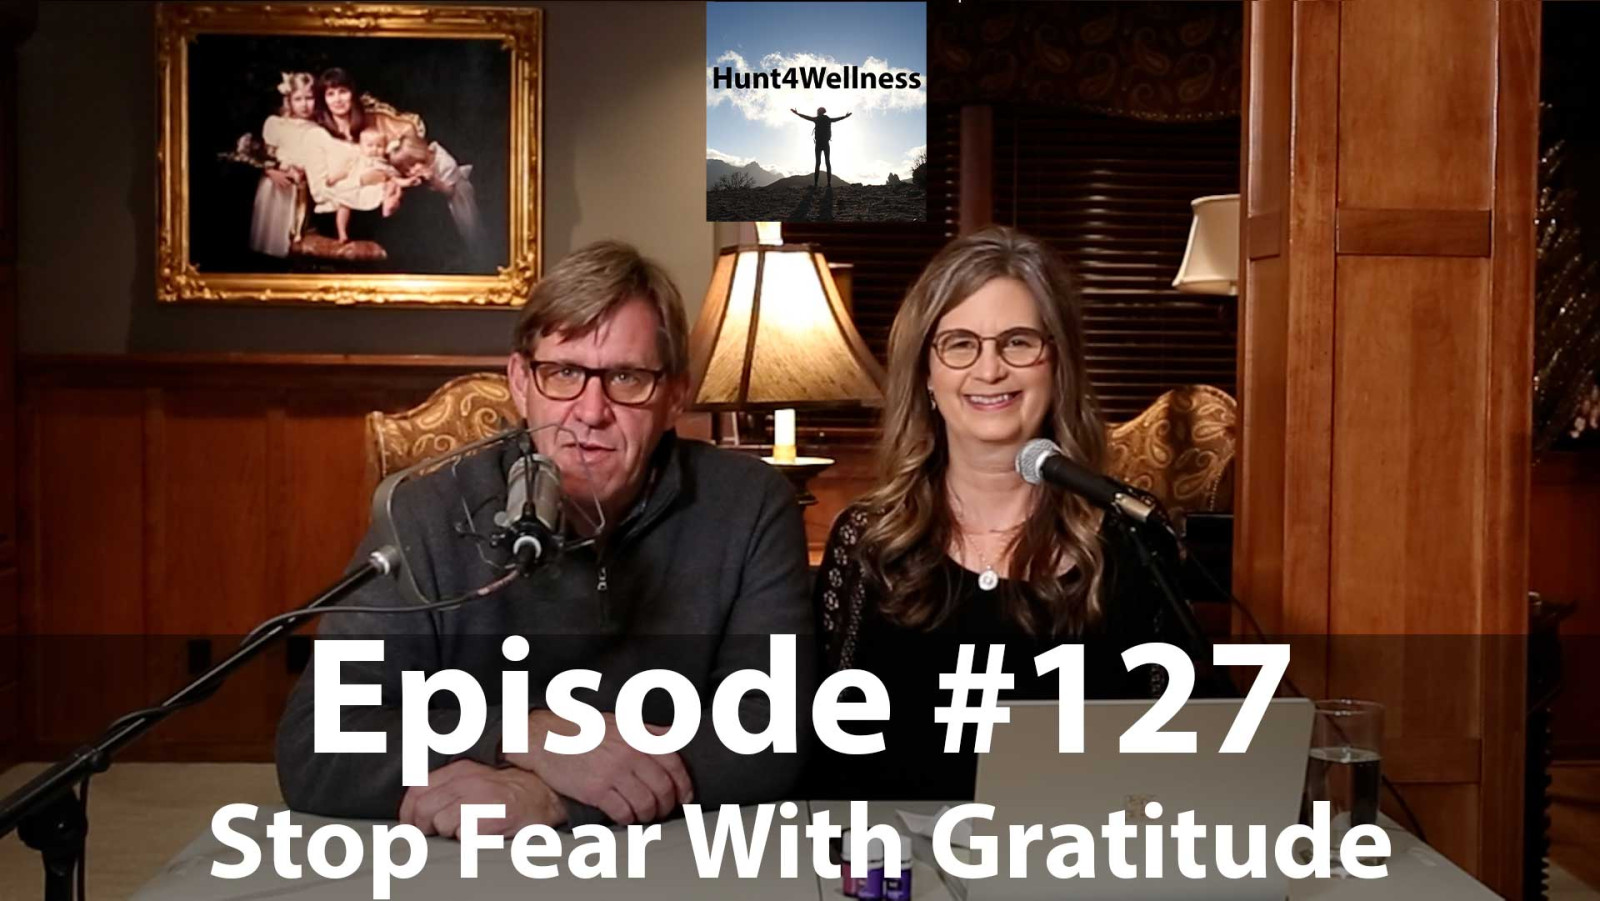 Episode #127 - Stop Fear With Gratitude